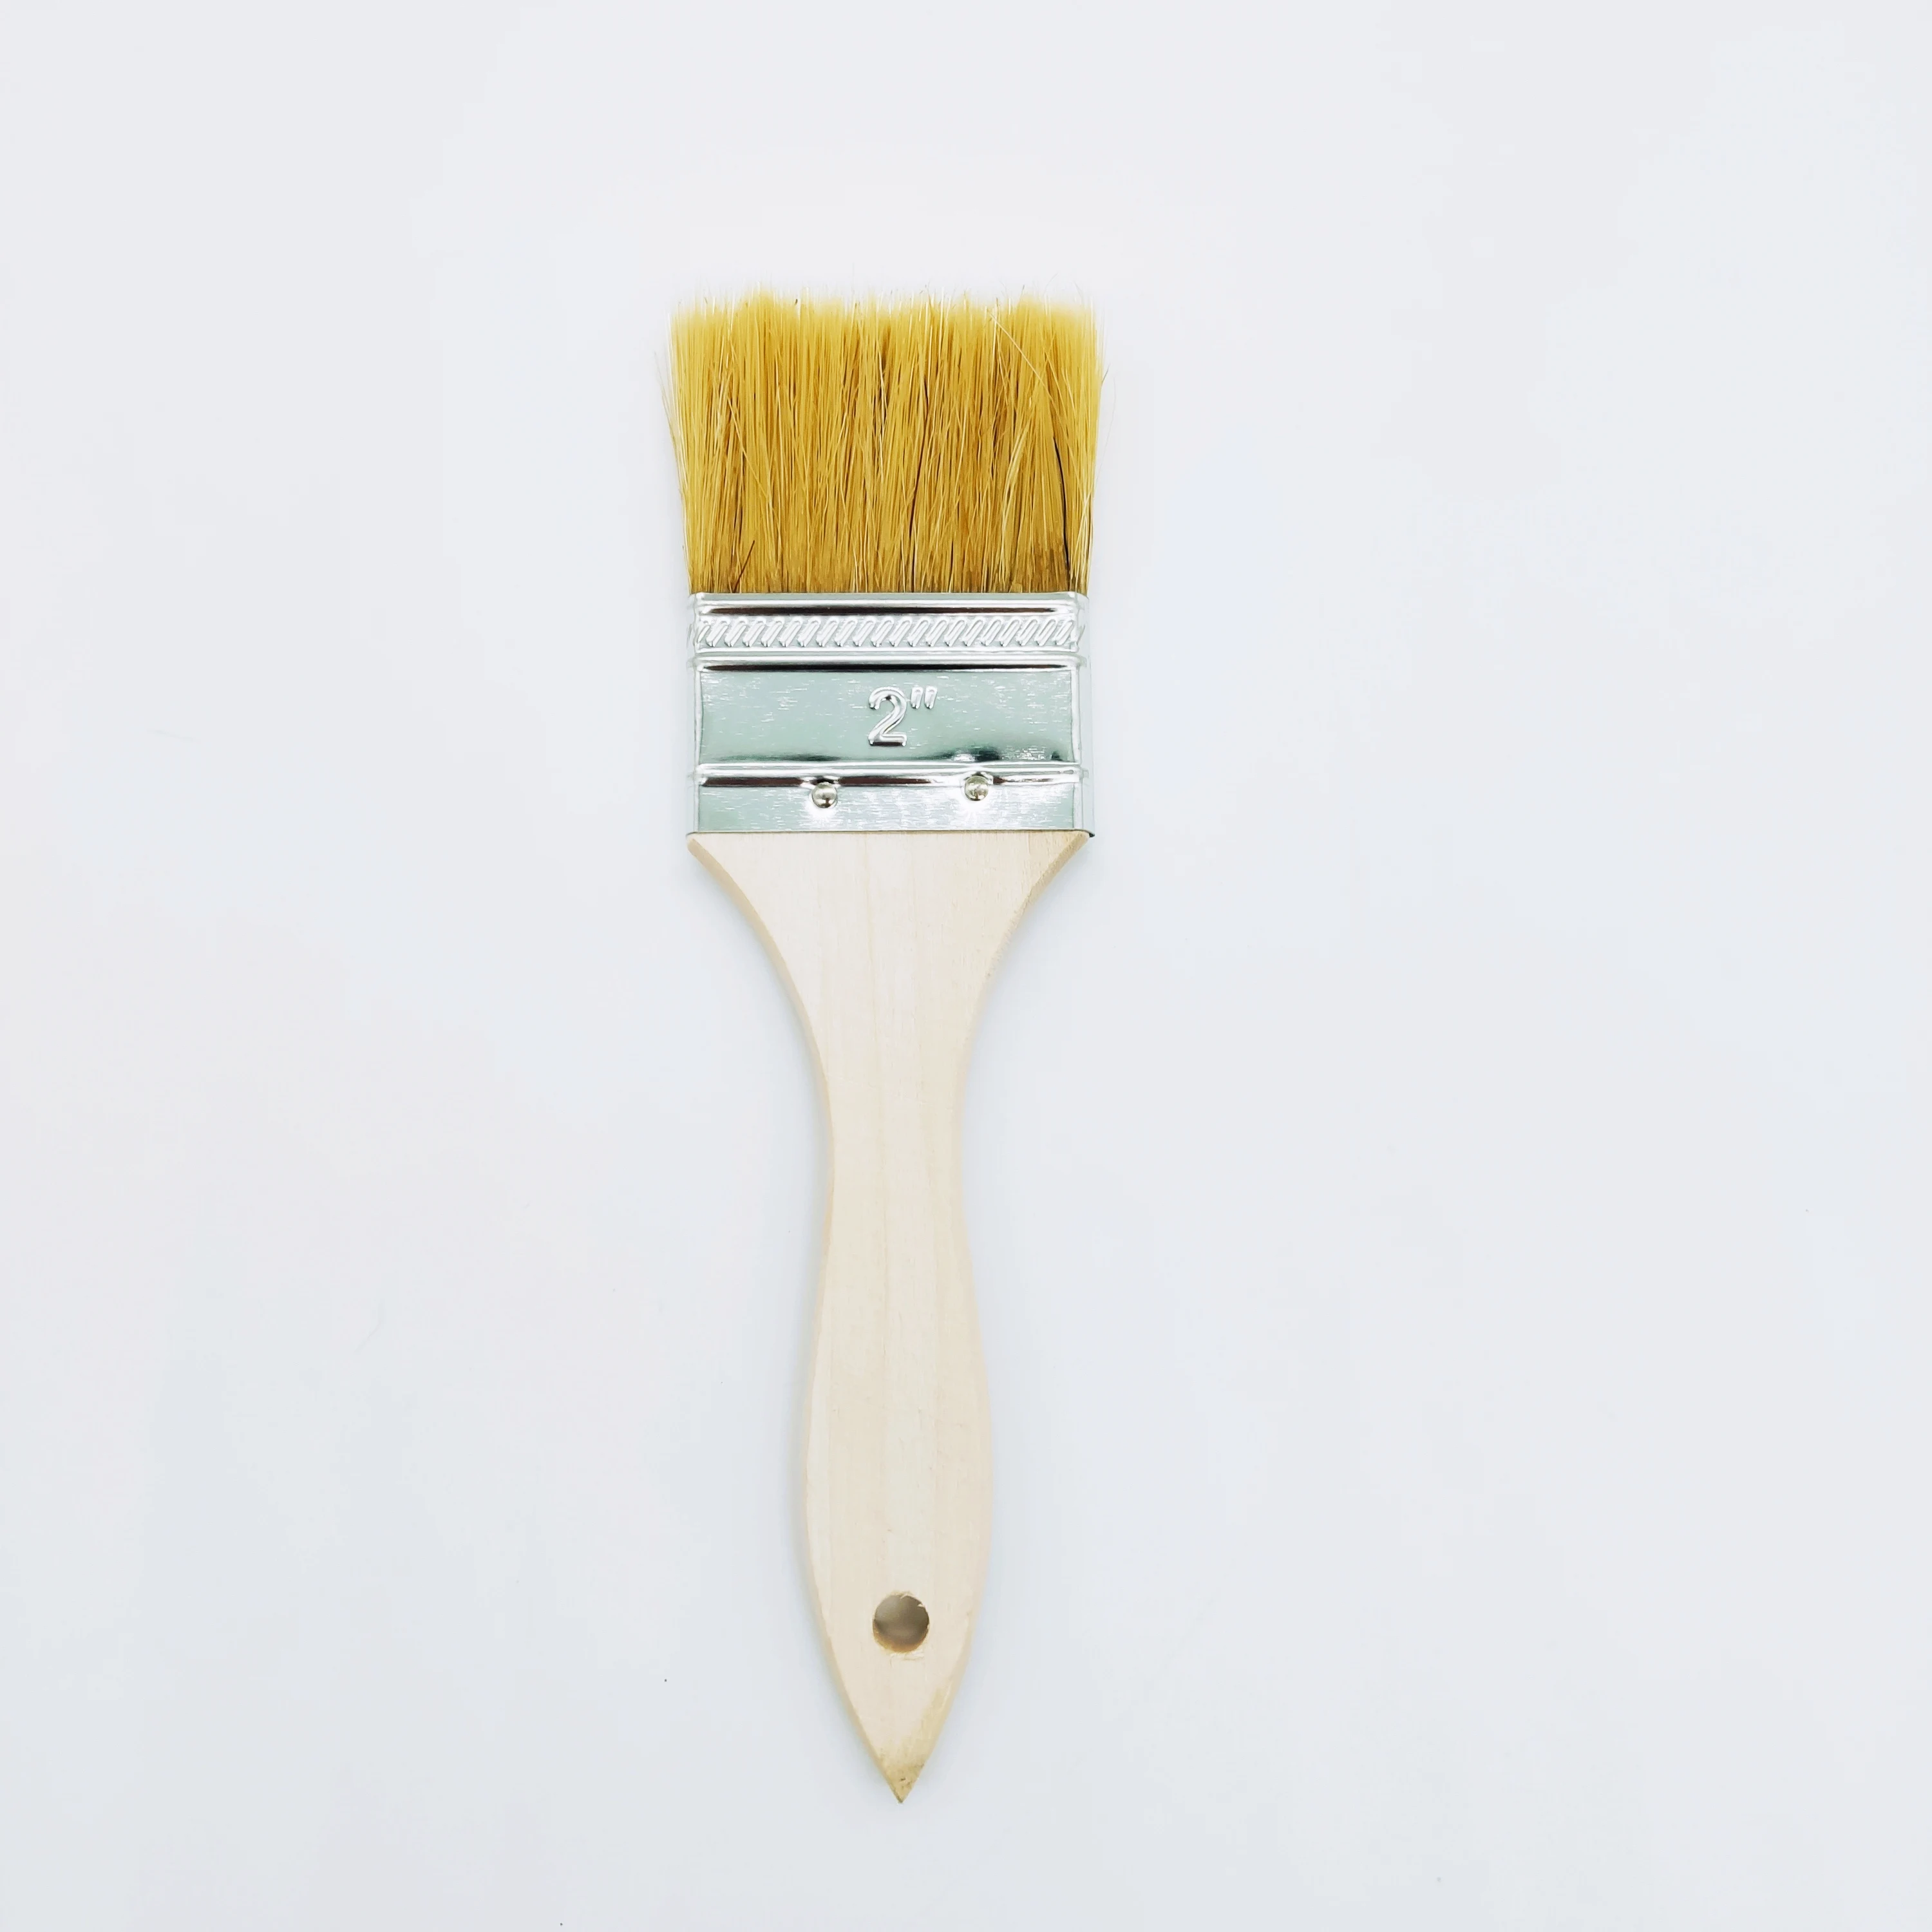 Excellent quality 100% natural bristle chip paint brush with thin wooden handle